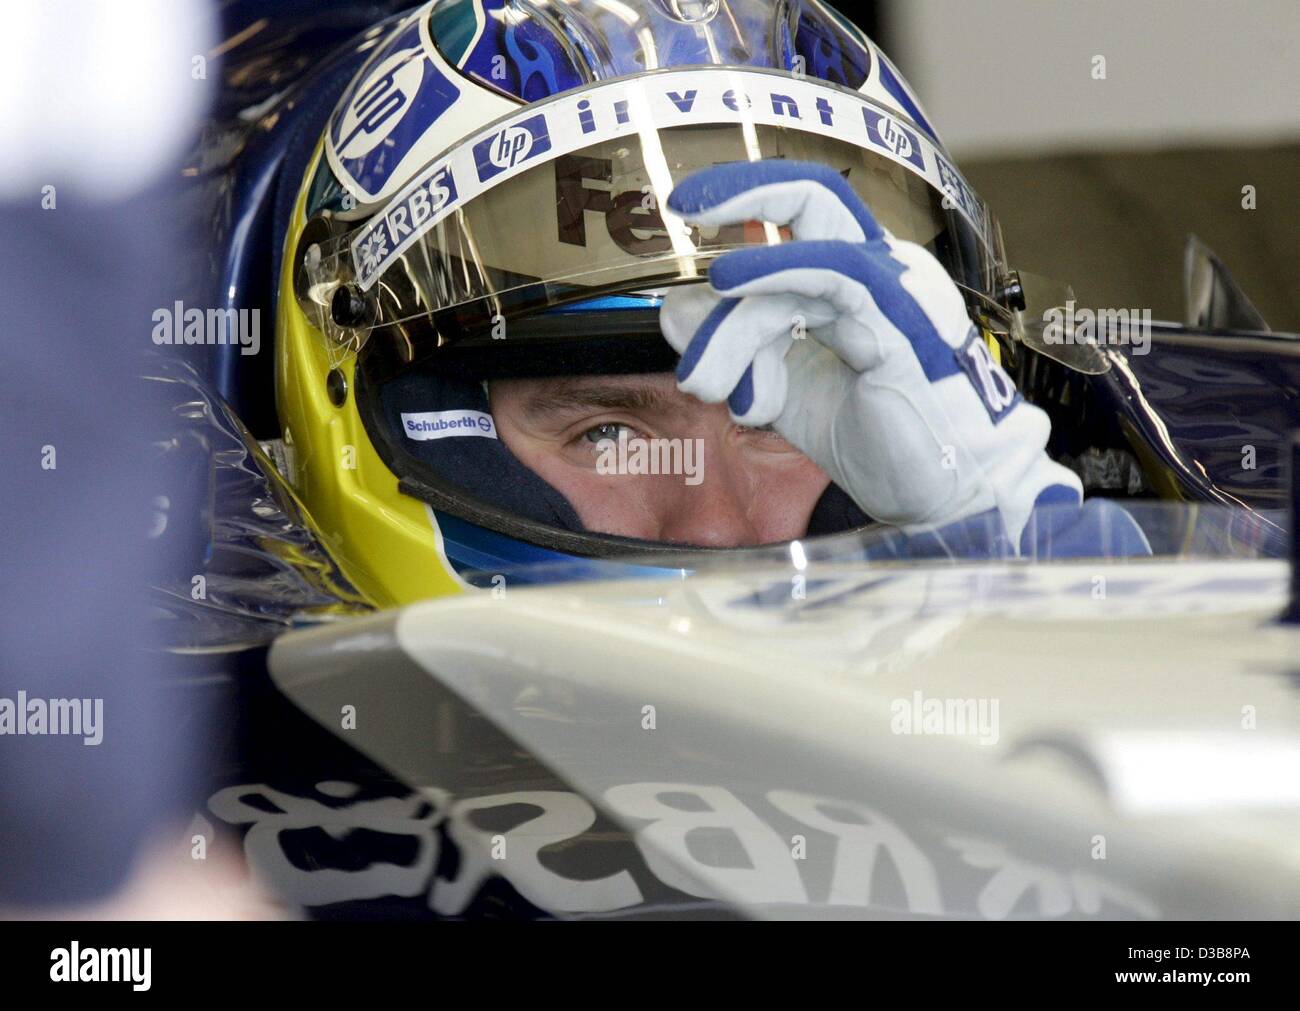 (dpa) - The picture shows German Formula One driver Nick Heidfeld of BMW-Williams during the second practice session at Silverstone circuit in England, 08 July 2005. The British Grand Prix will take place there on Sunday, 10 July 2005. Heidfeld clocked the 18th fastest time at second practice sessio Stock Photo